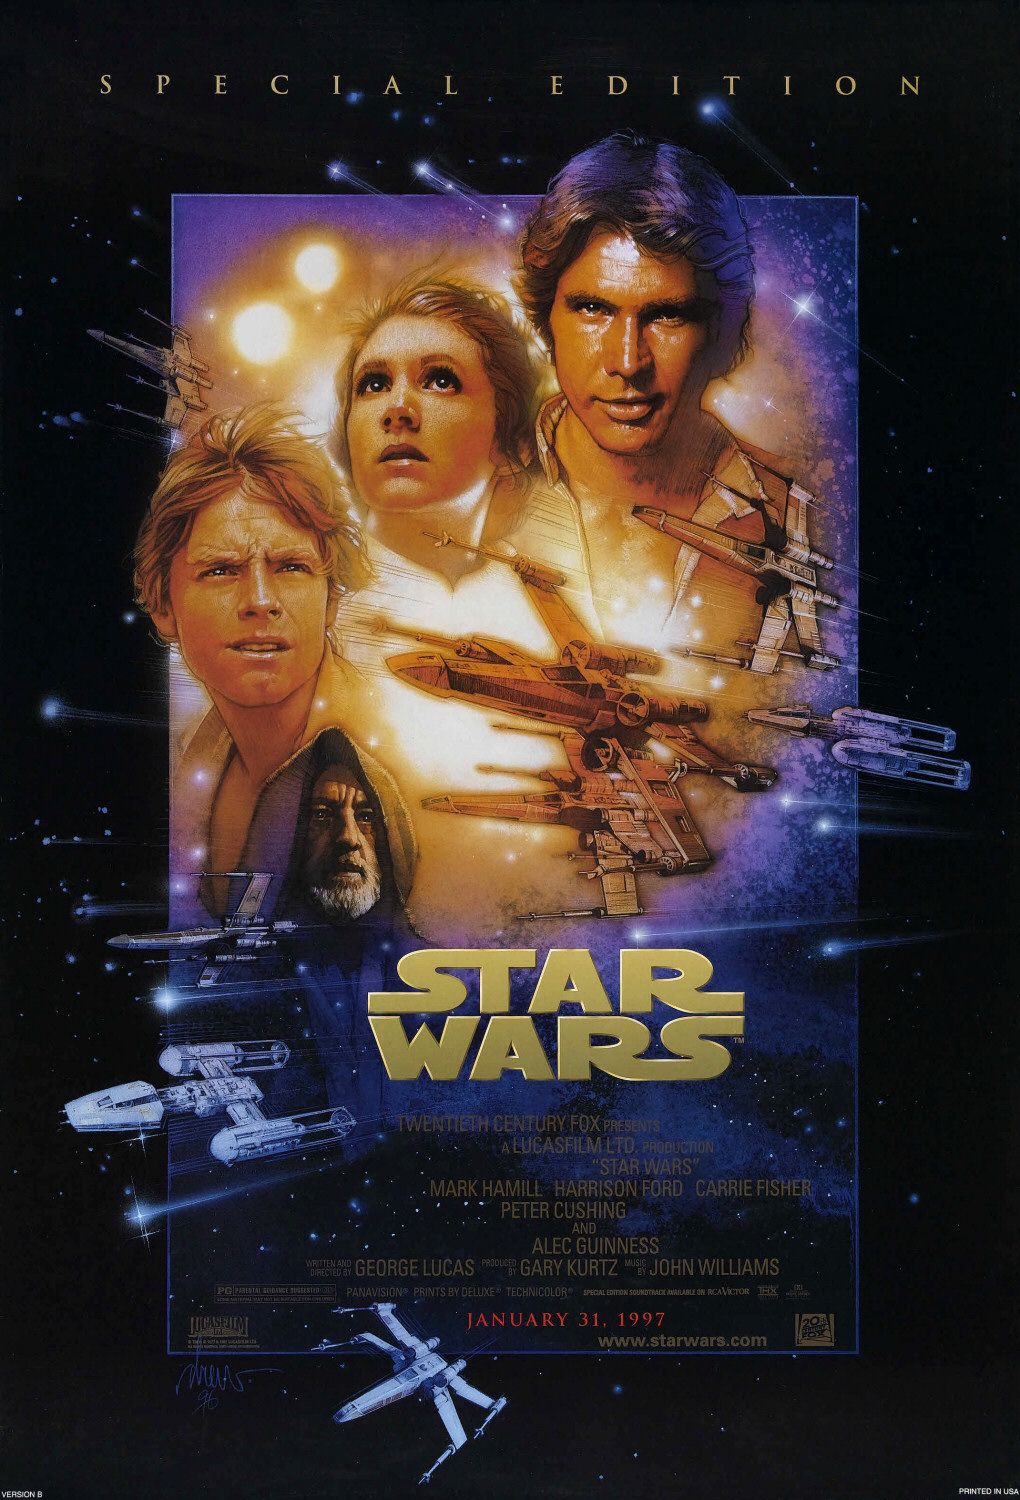 Space Wars: Quest for the Deepstar (#8 of 10): Extra Large Movie Poster  Image - IMP Awards